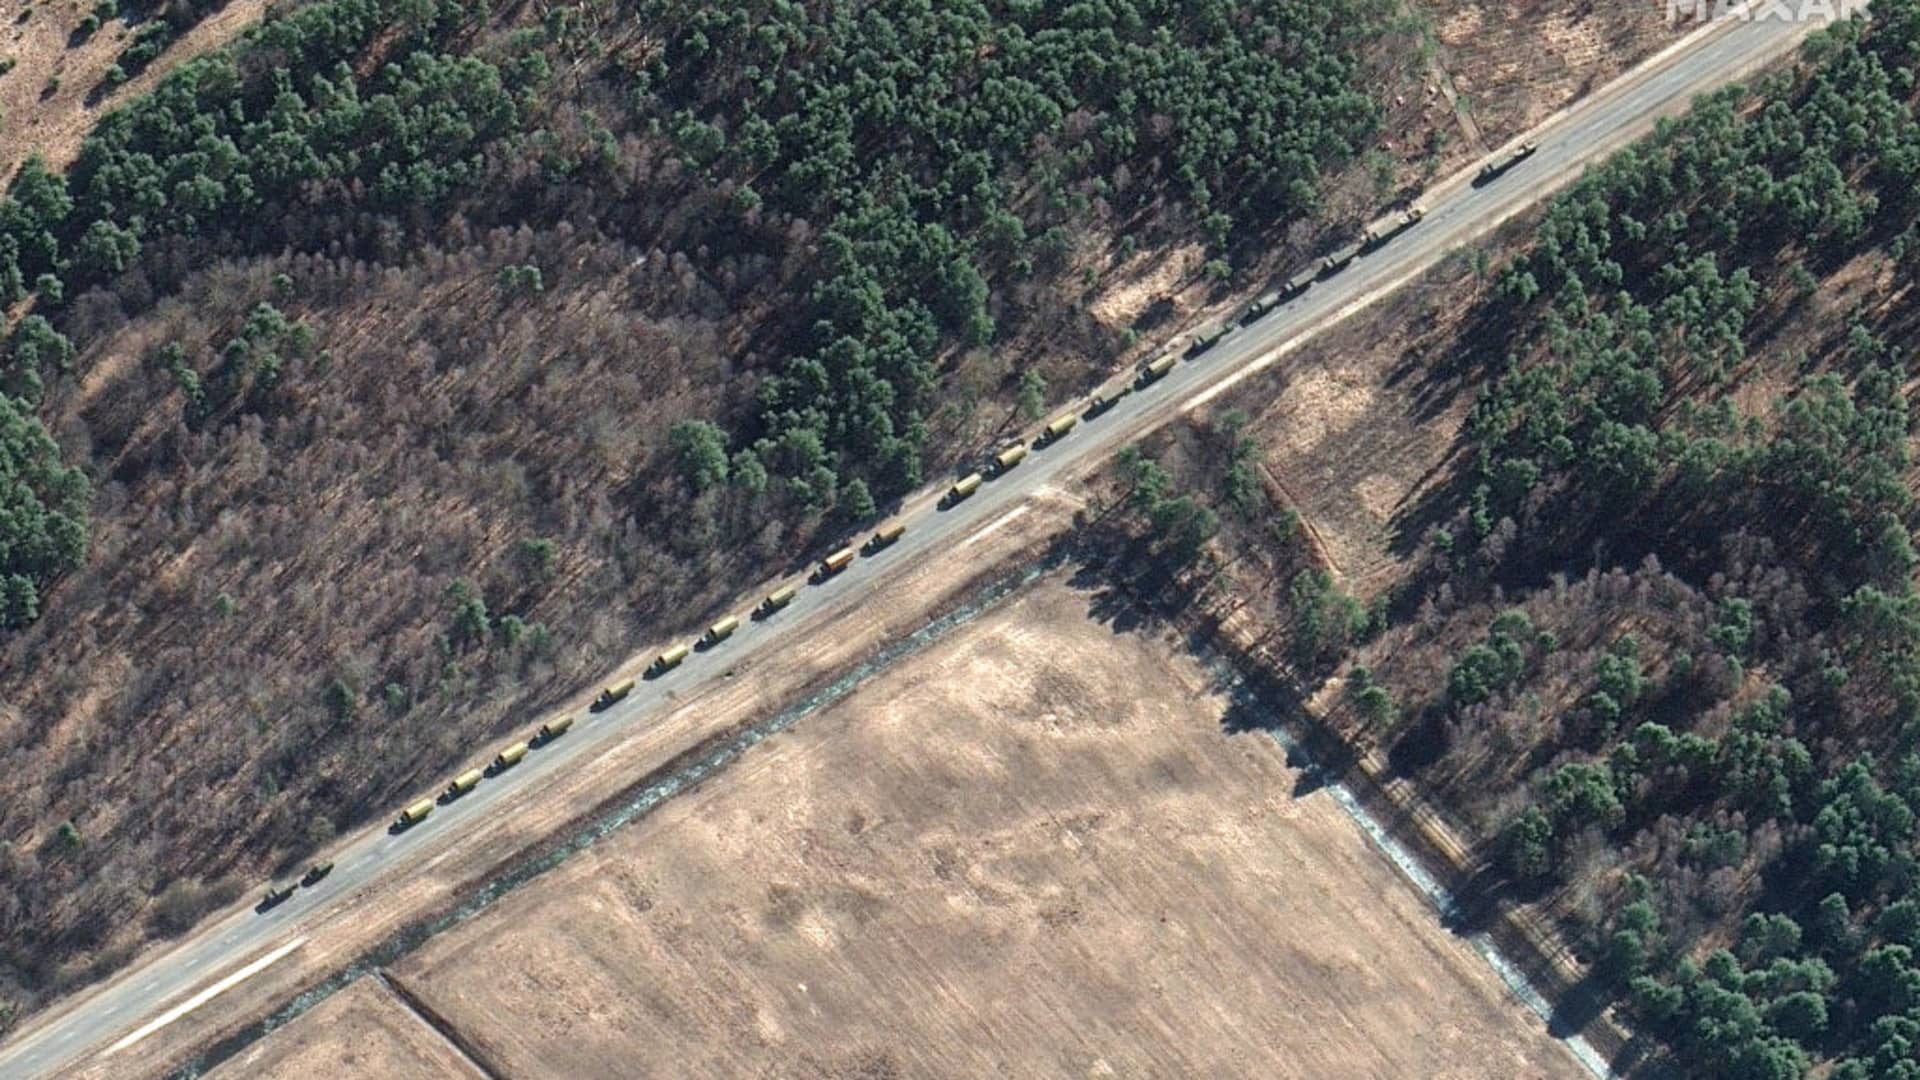 Maxar satellite imagery of mobile bridging unit in convoy on highwayin Southern Belarus.